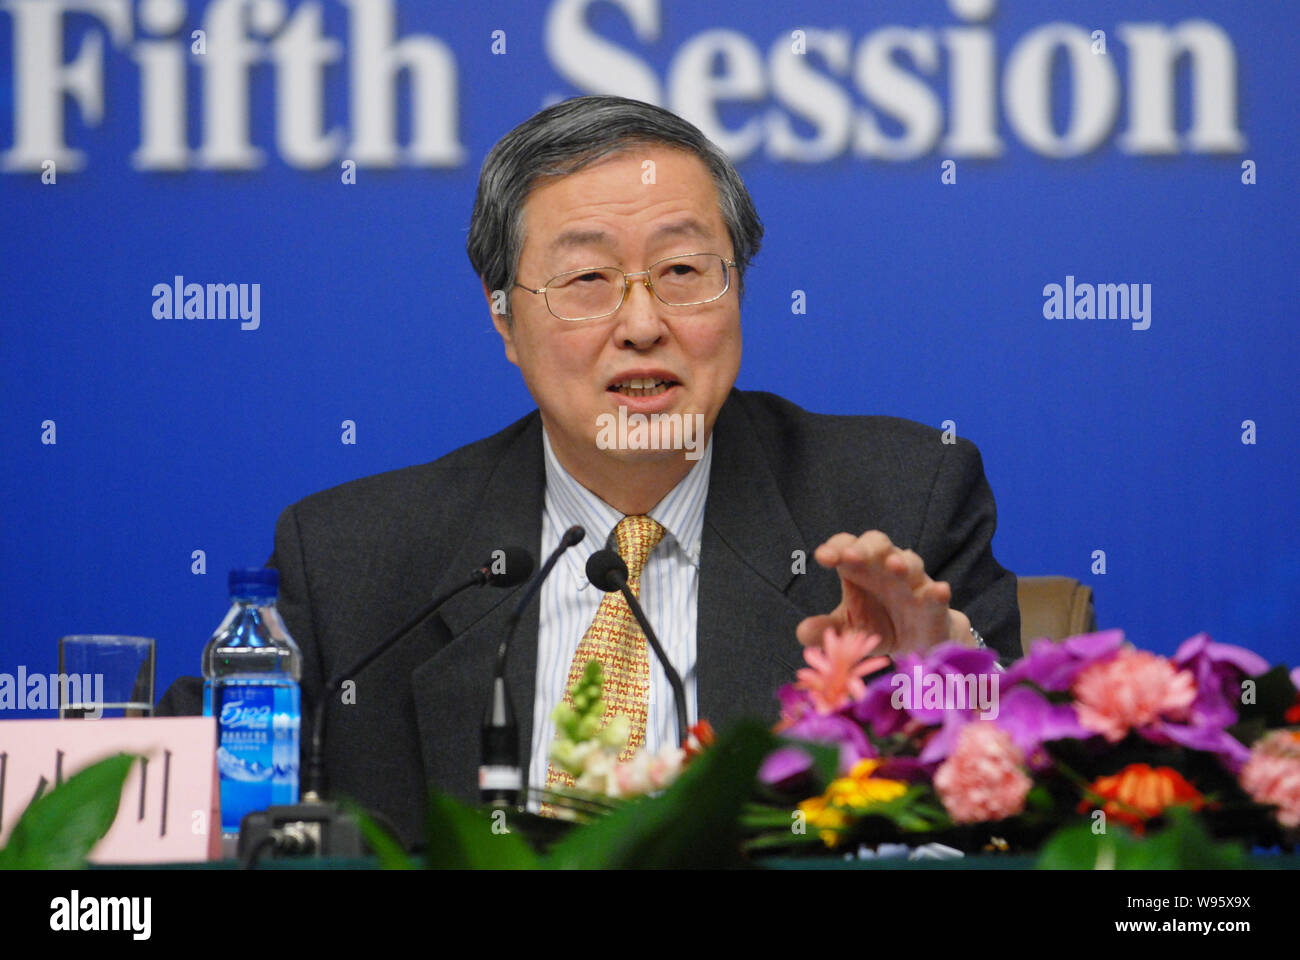 Chinas central bank governor Zhou Xiaochuan speaks during a press conference on monetary policy and financial reform on the sidelines of the Fifth Ses Stock Photo